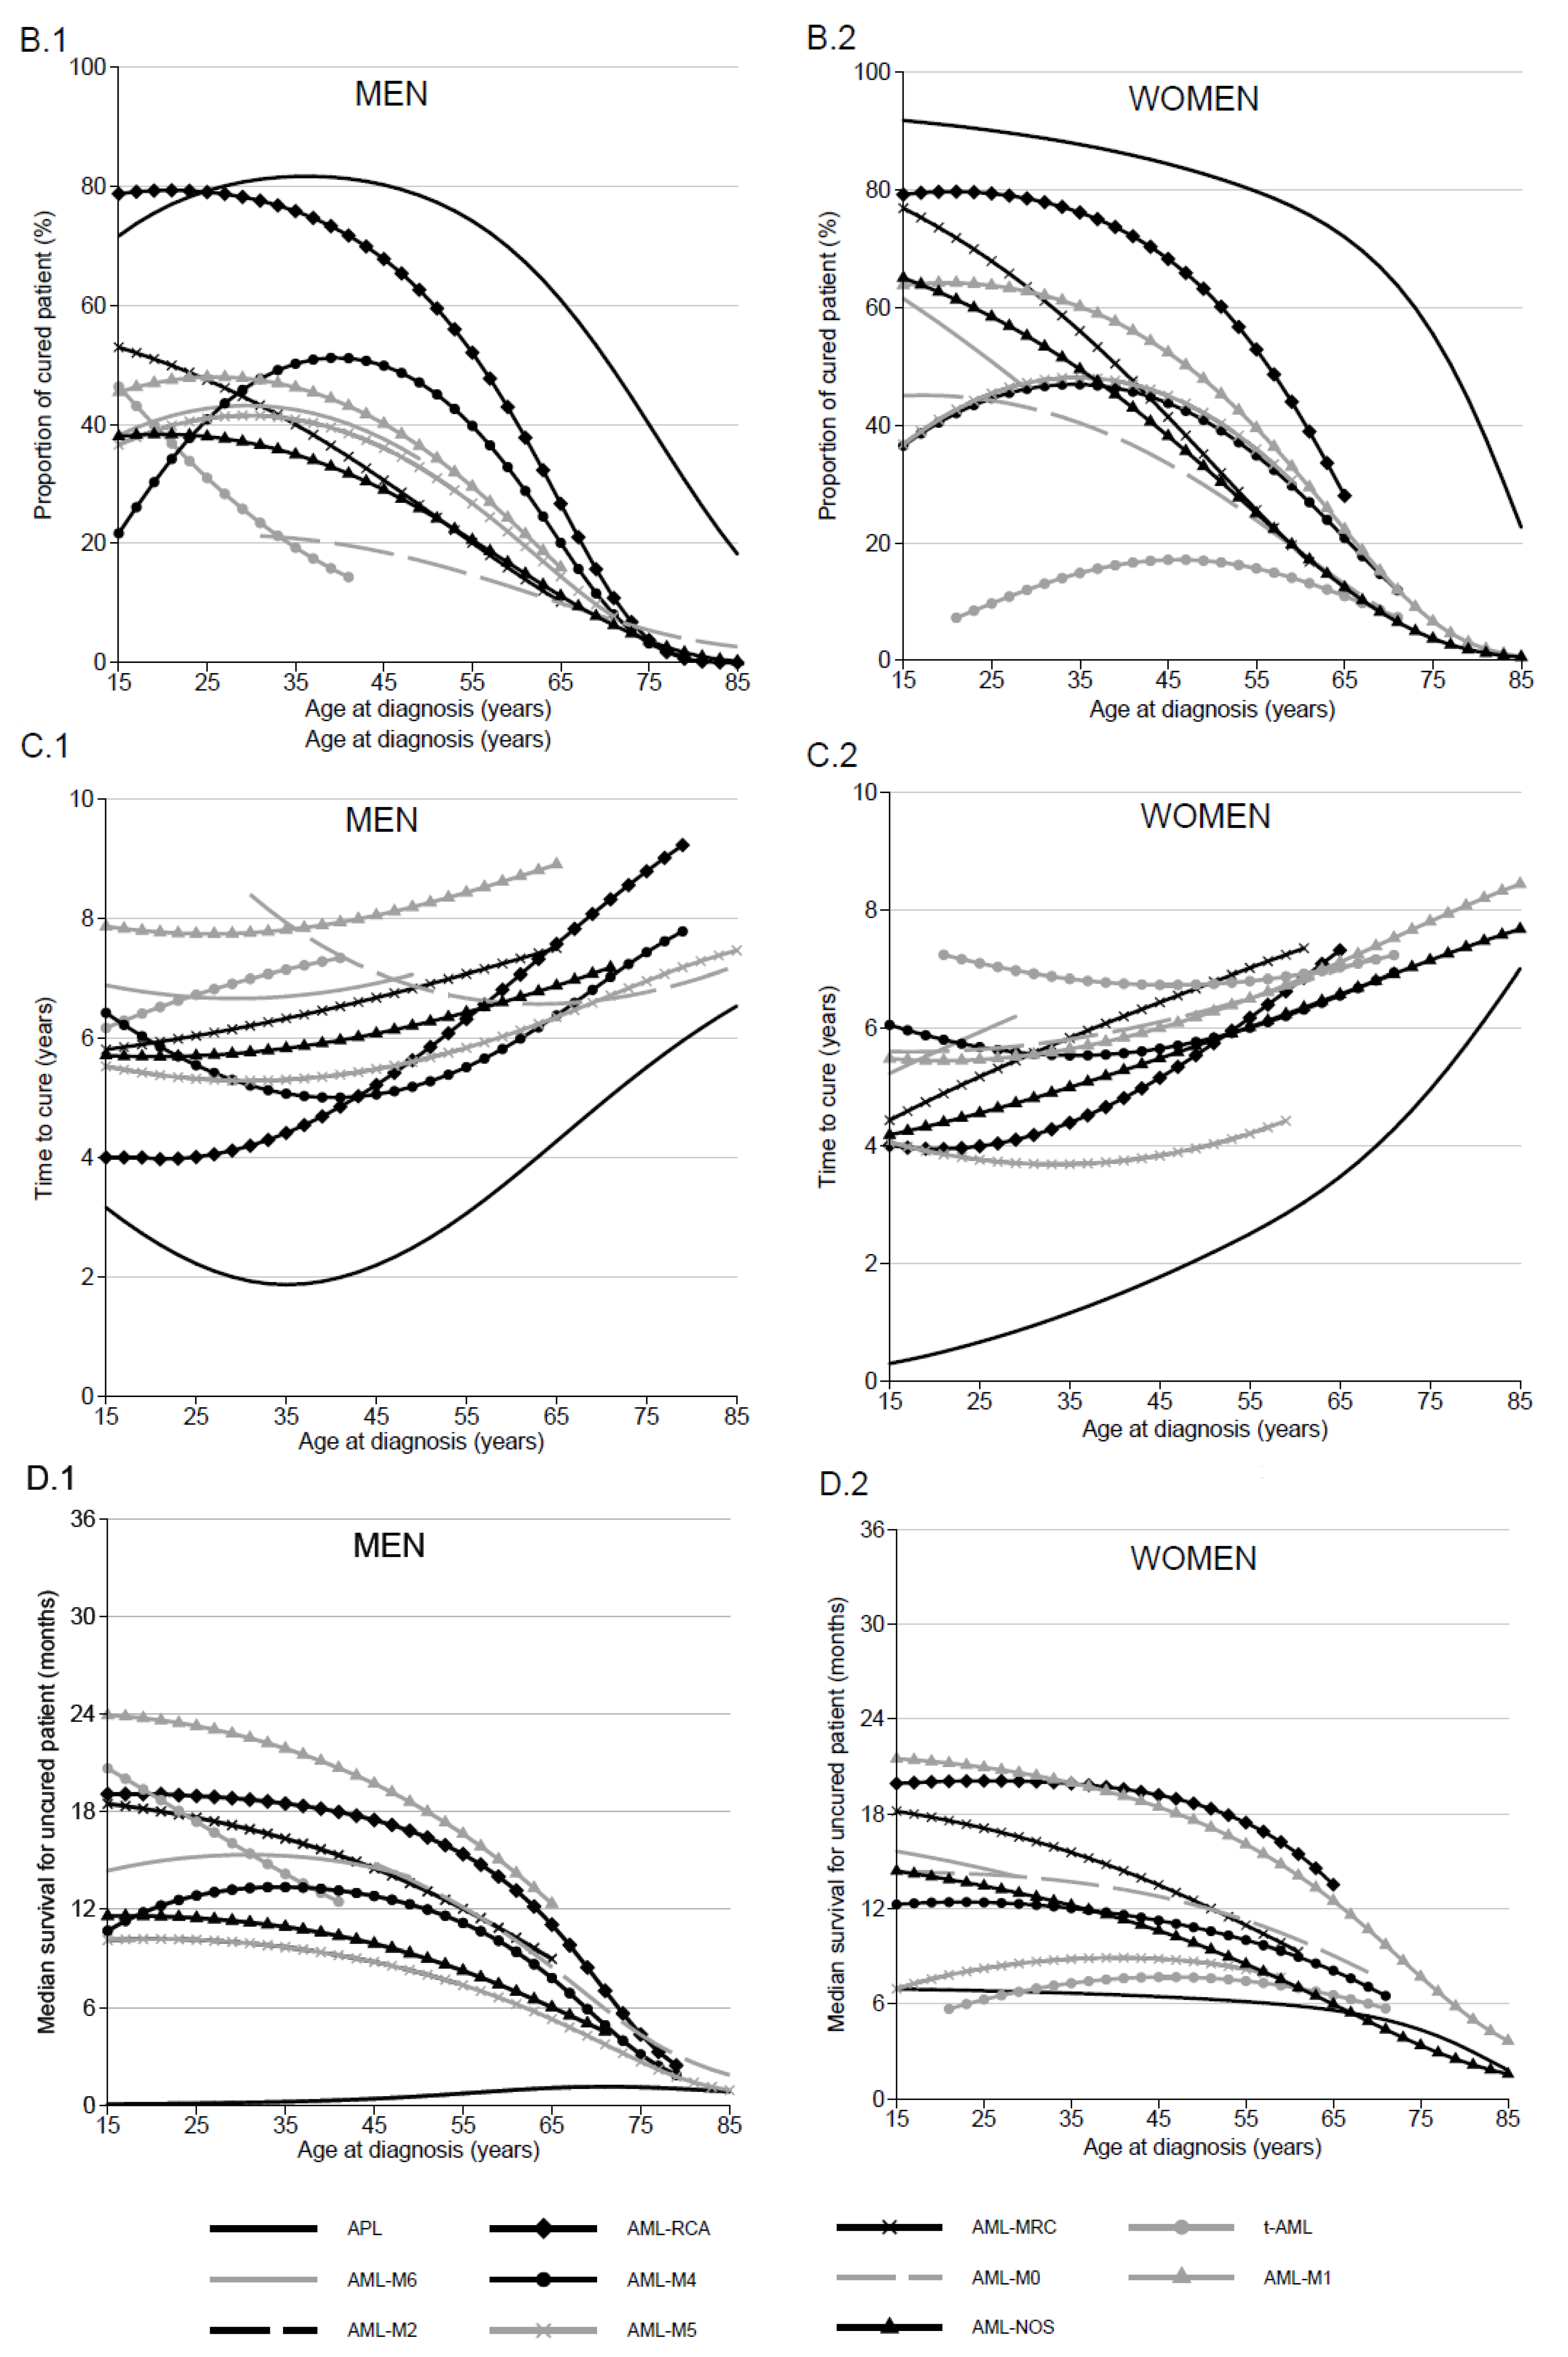 JCM | Free Full-Text | Flexible Modeling of Net Survival and Cure by AML  Subtype and Age: A French Population-Based Study from FRANCIM | HTML